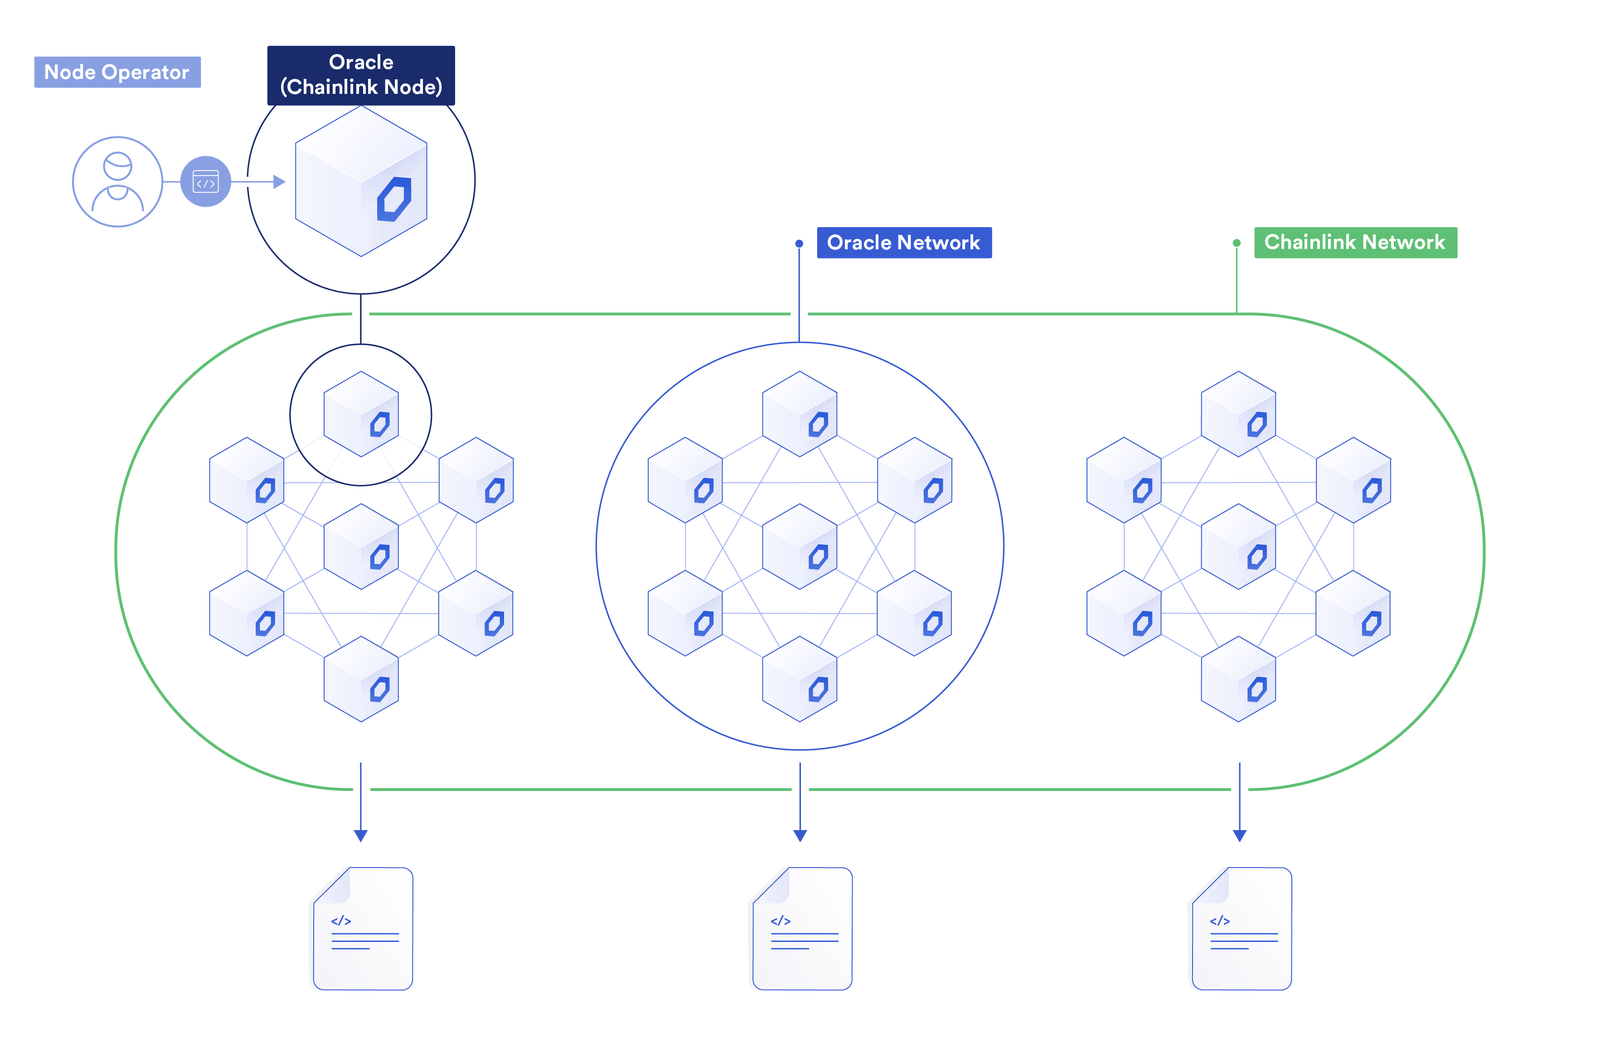 The various components of Chainlink's oracle network